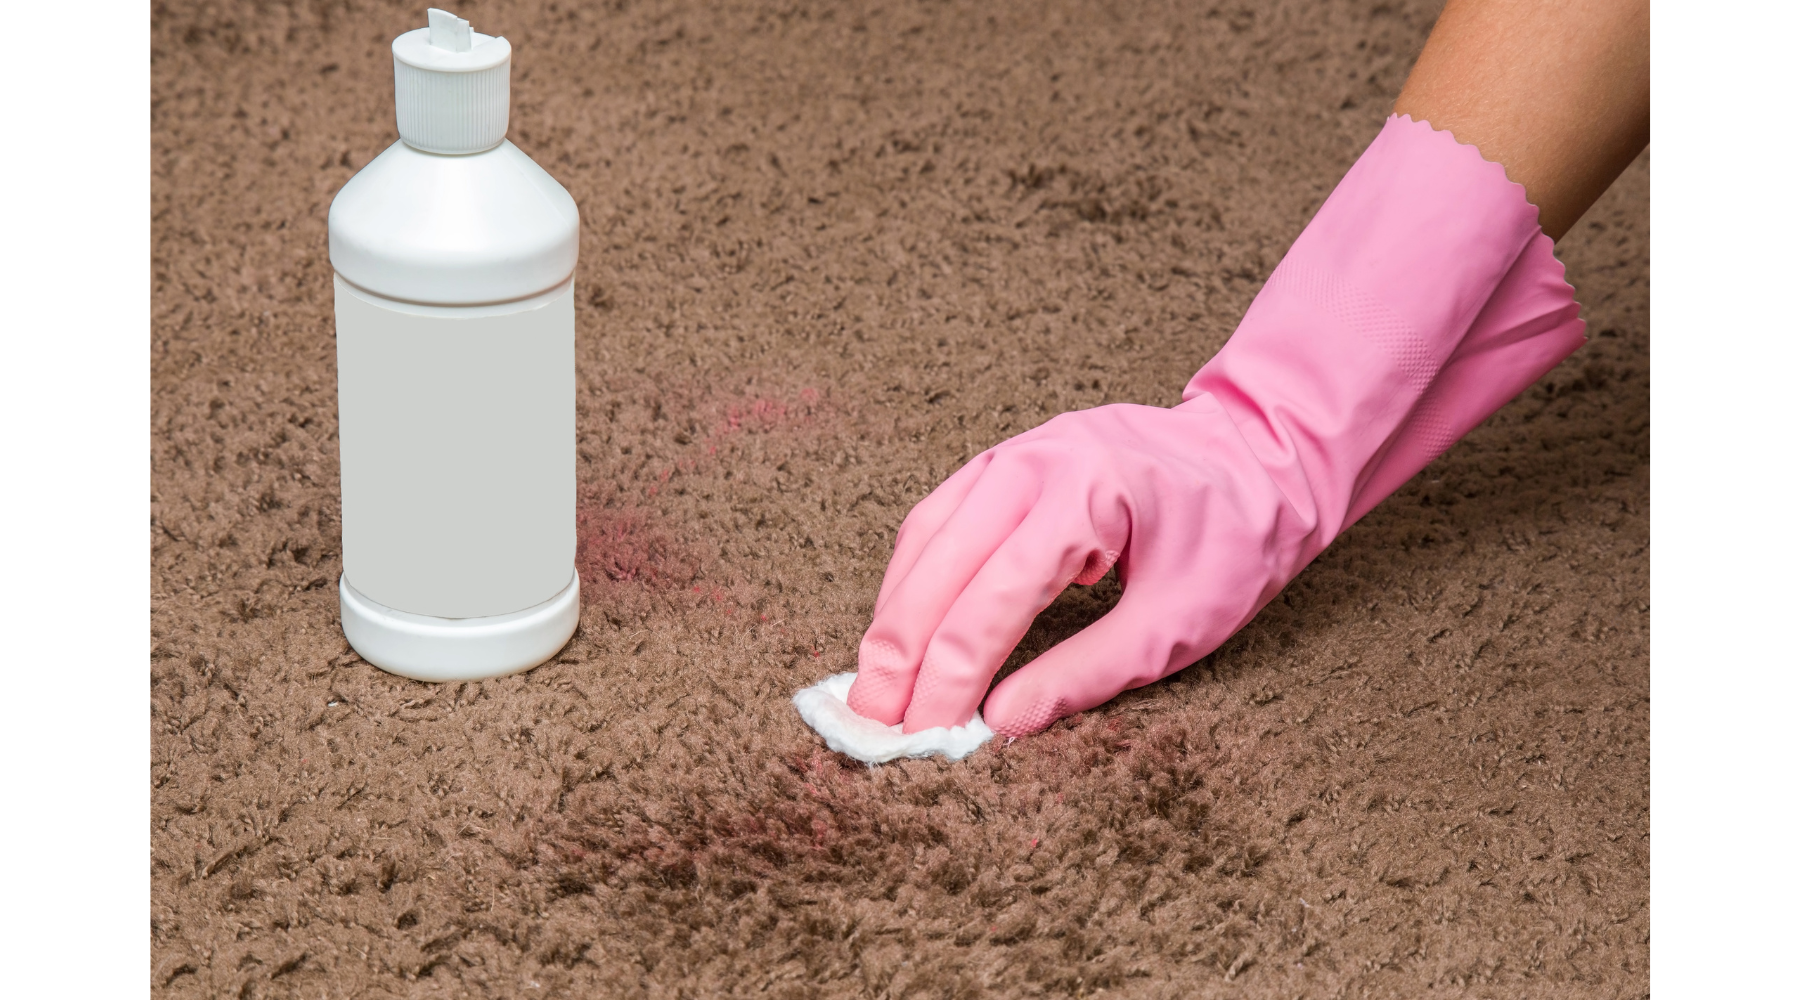 woman applying homemade carpet cleaning solution on a rug and Let the solution sit for a few minutes to allow it to work its way into the carpet fibers